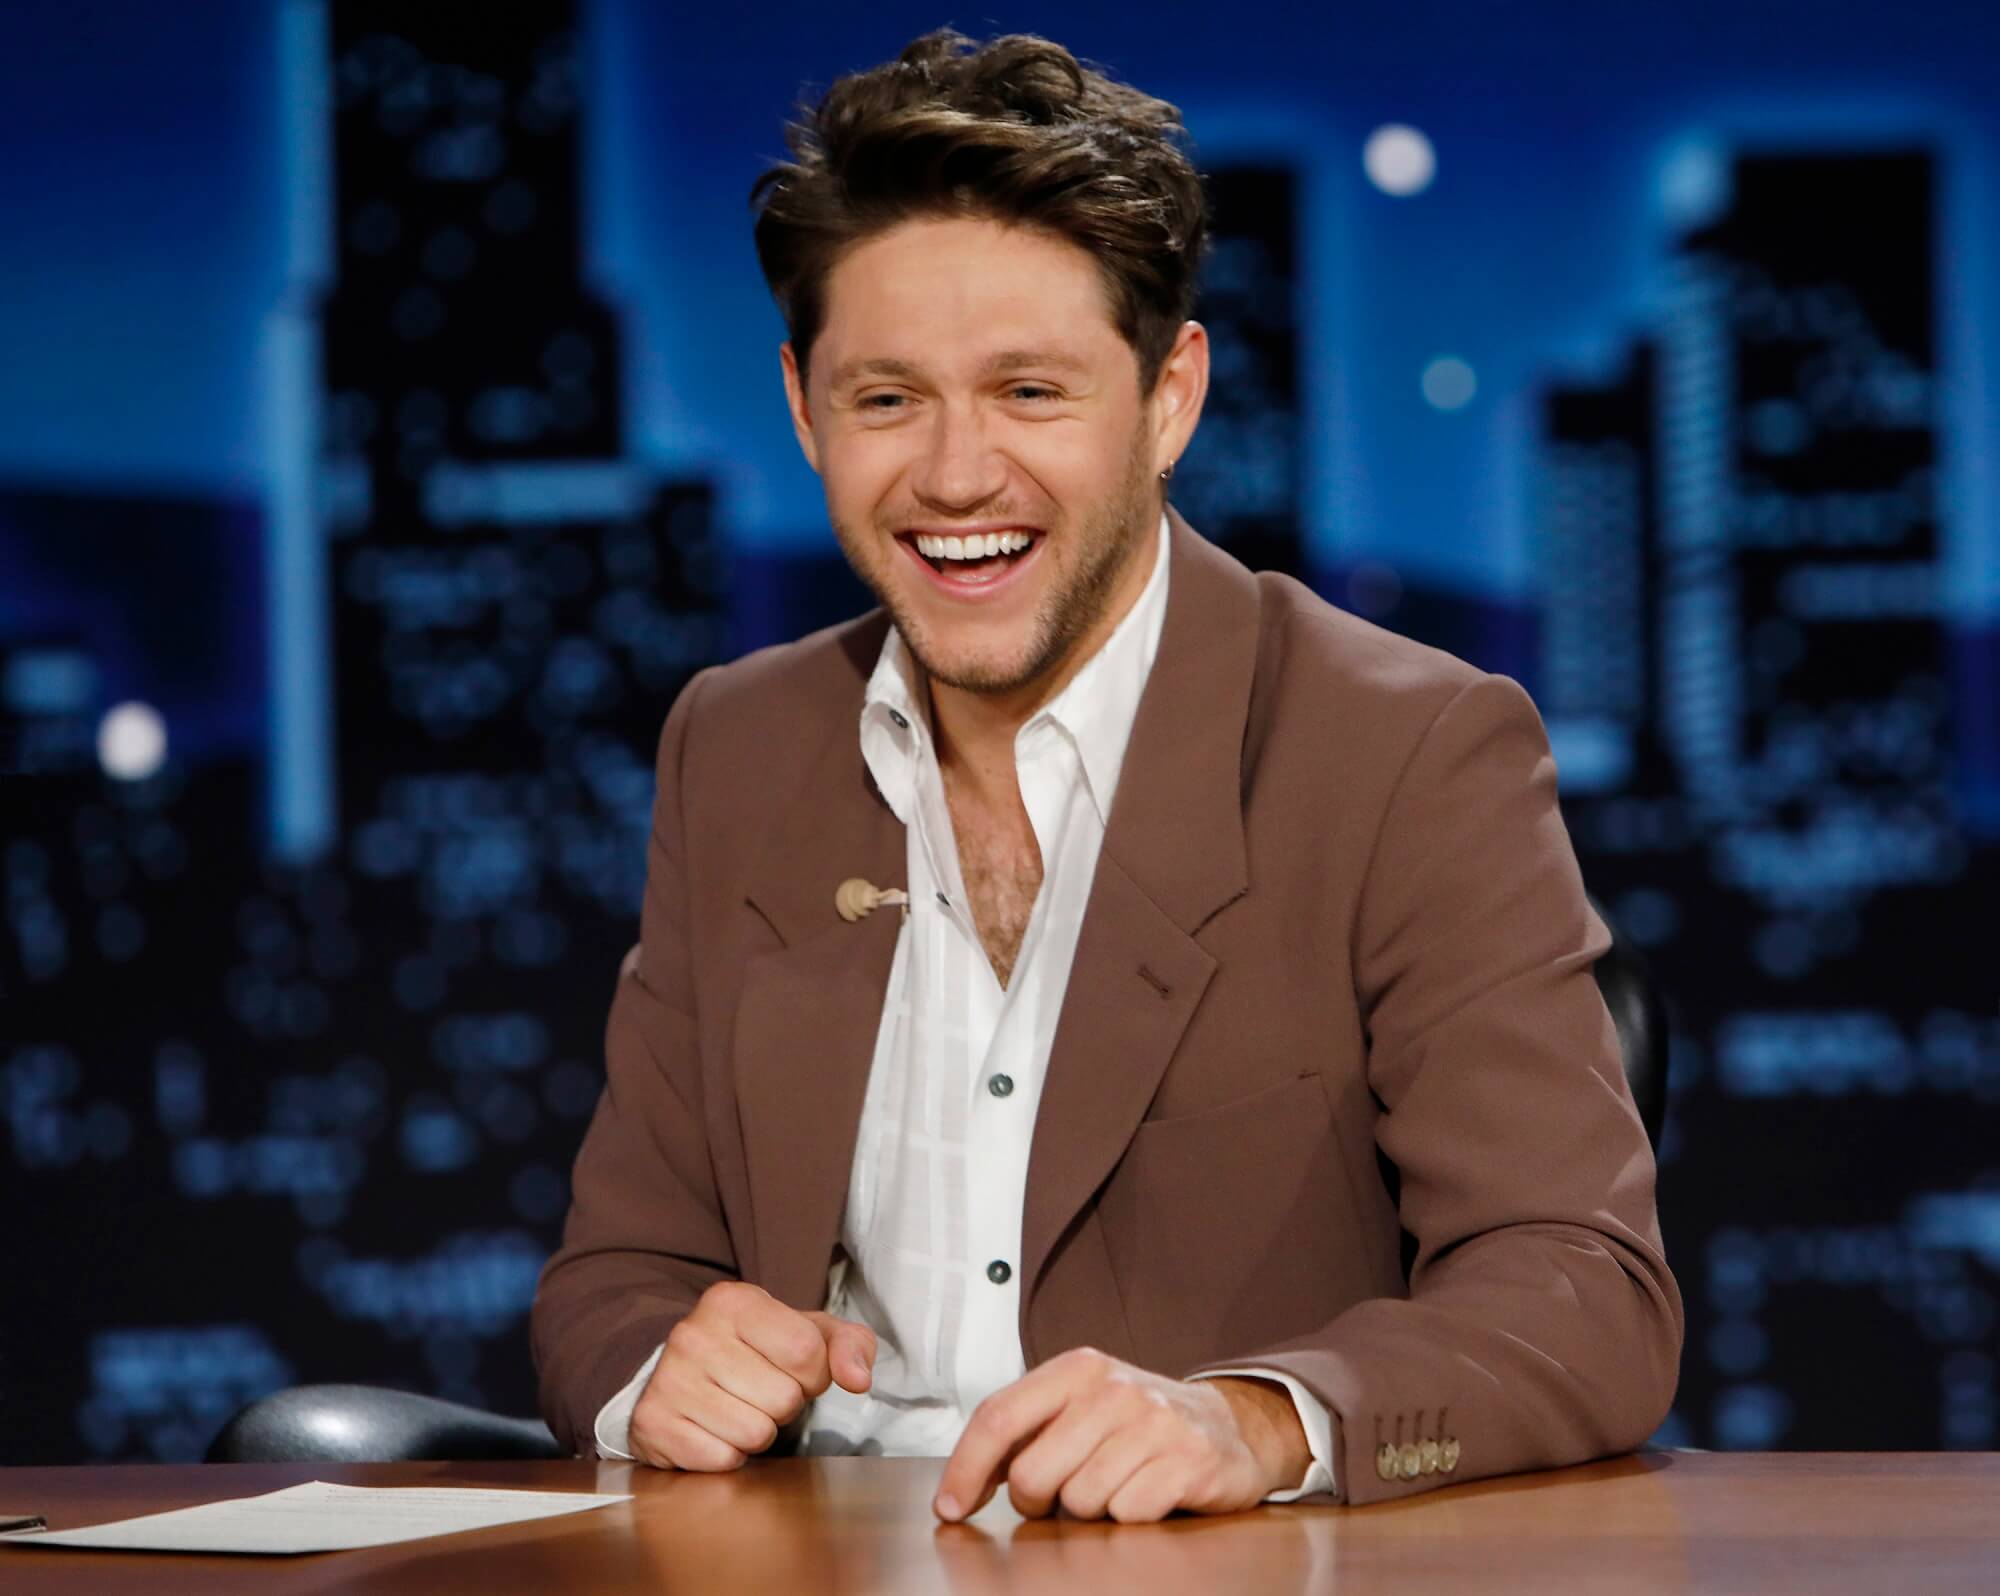 Niall Horan laughs while sitting at a desk in a white button down and brown jacket